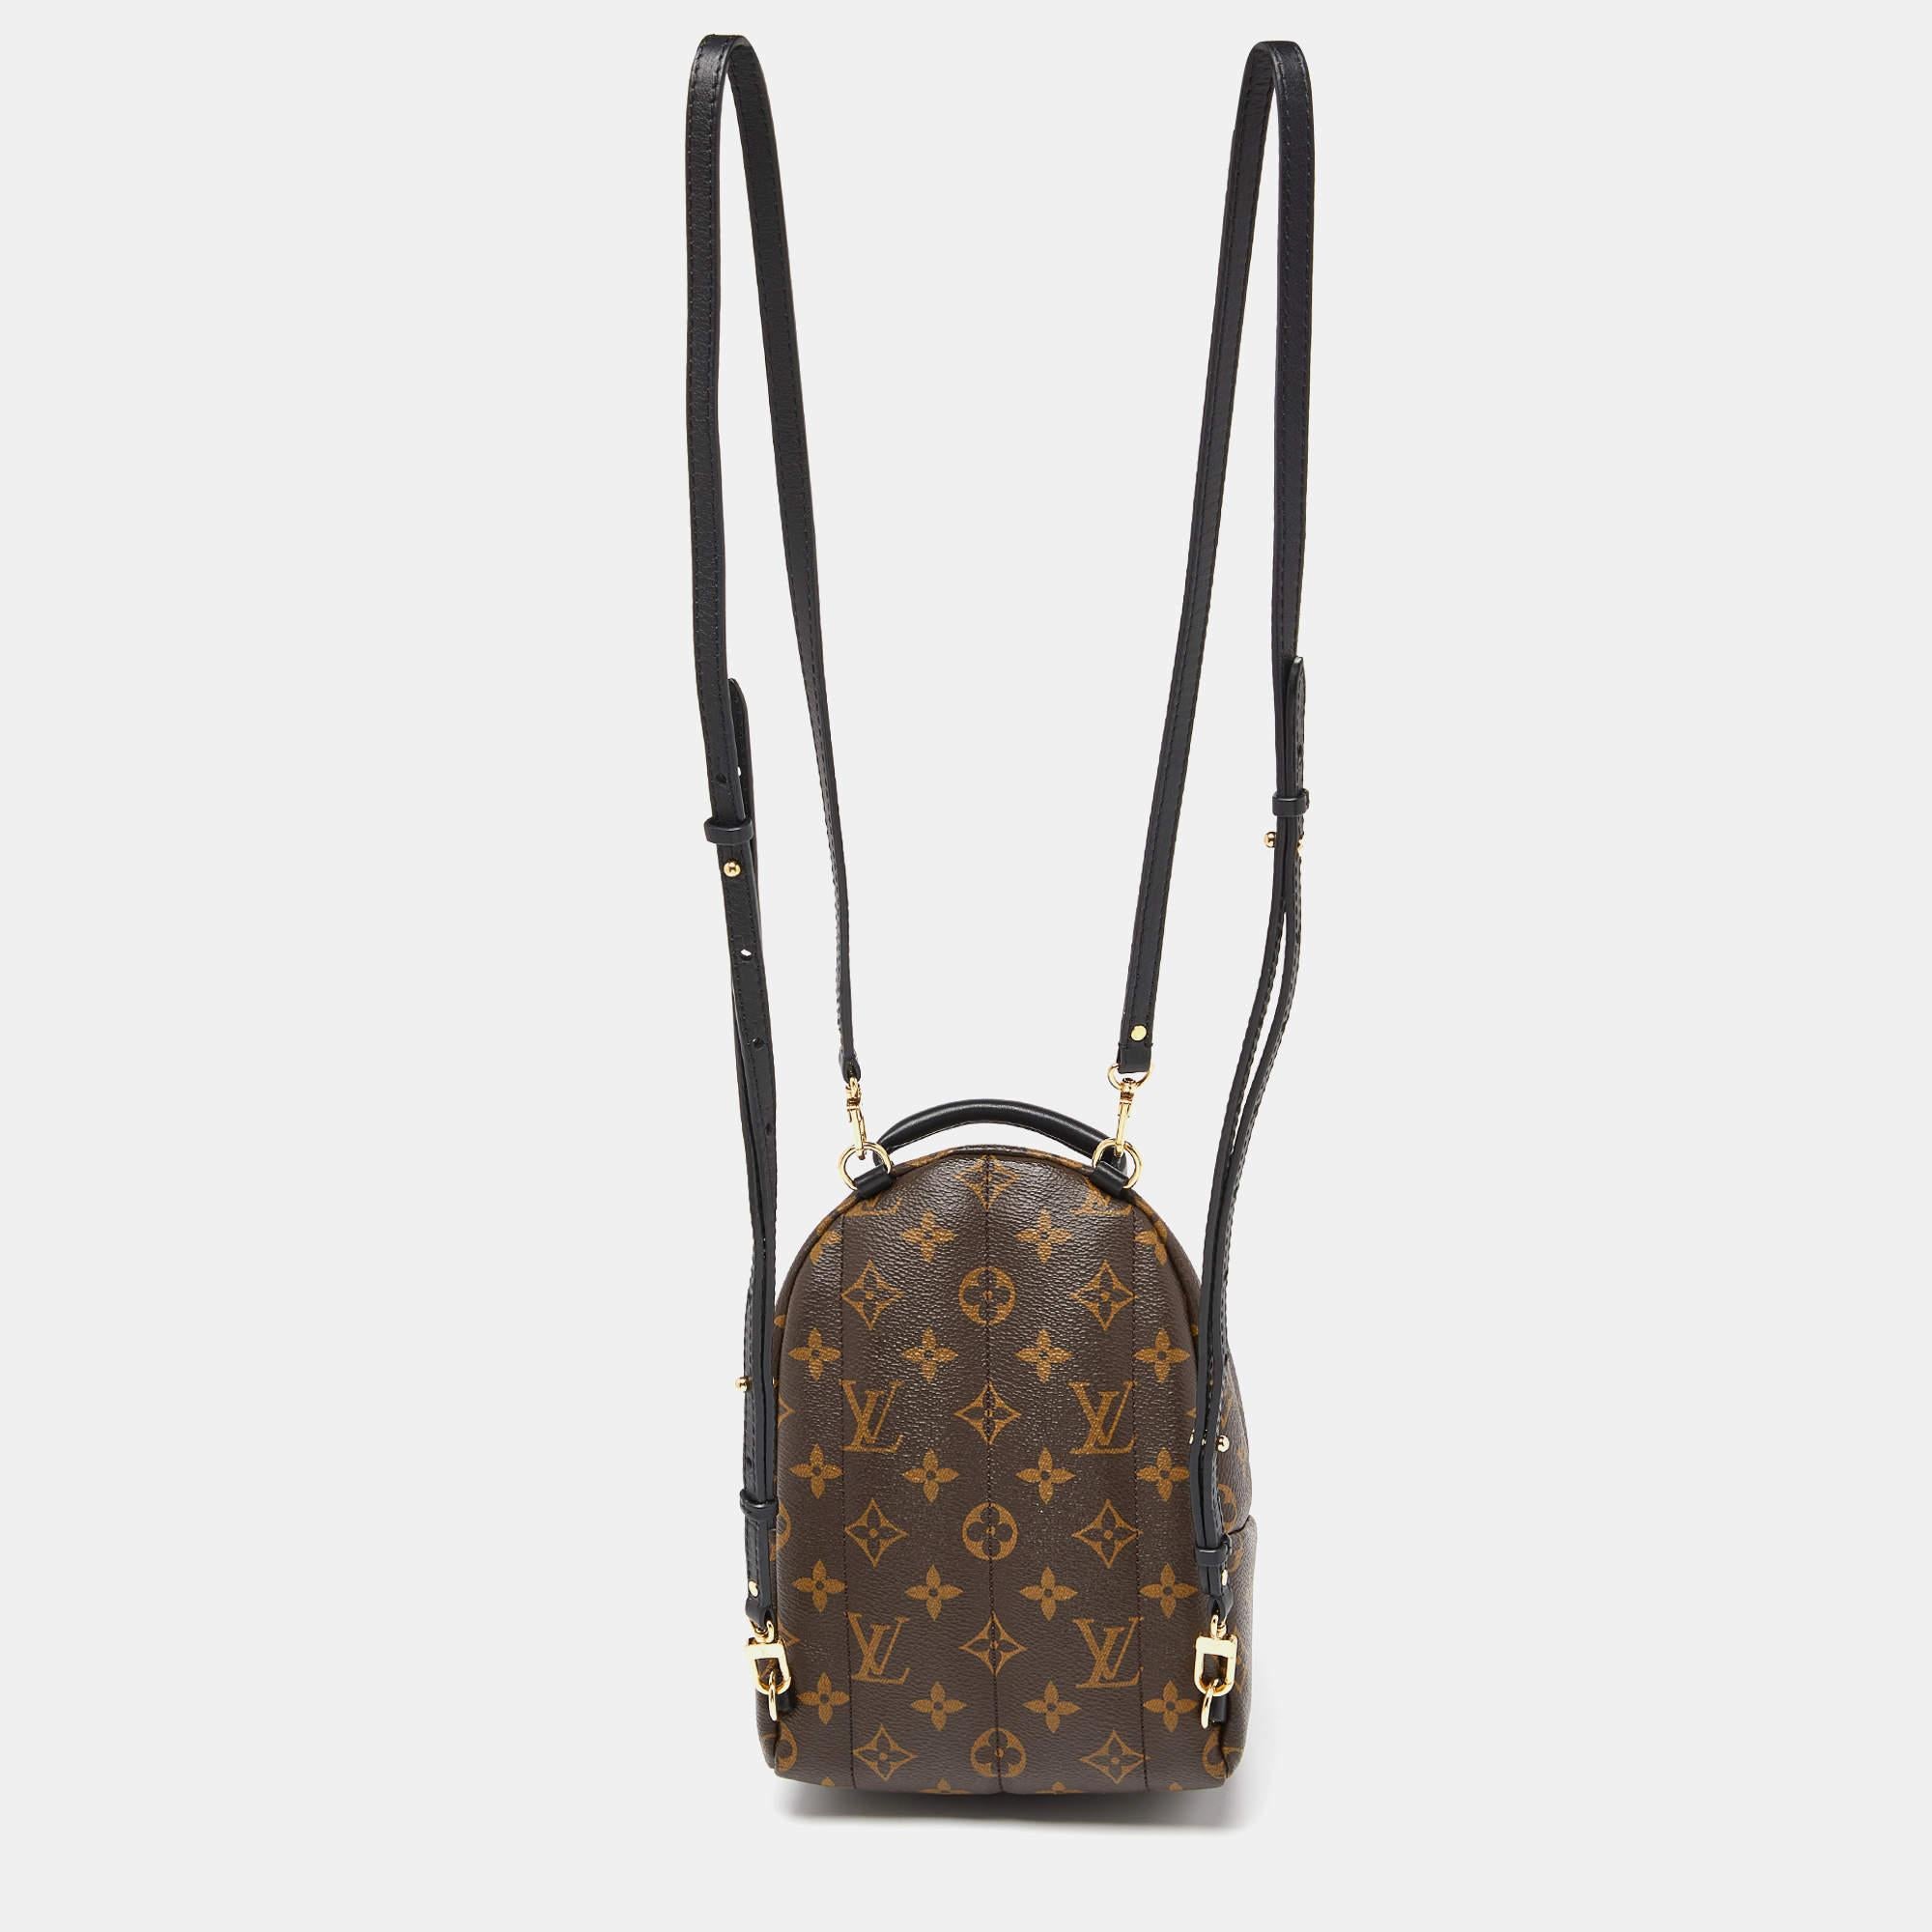 The Palm Springs backpack from Louis Vuitton is a practical staple and an on-point city bag. This stylish creation is crafted from Monogram canvas and detailed with gold-tone hardware. The optional adjustable straps will provide a hands-free